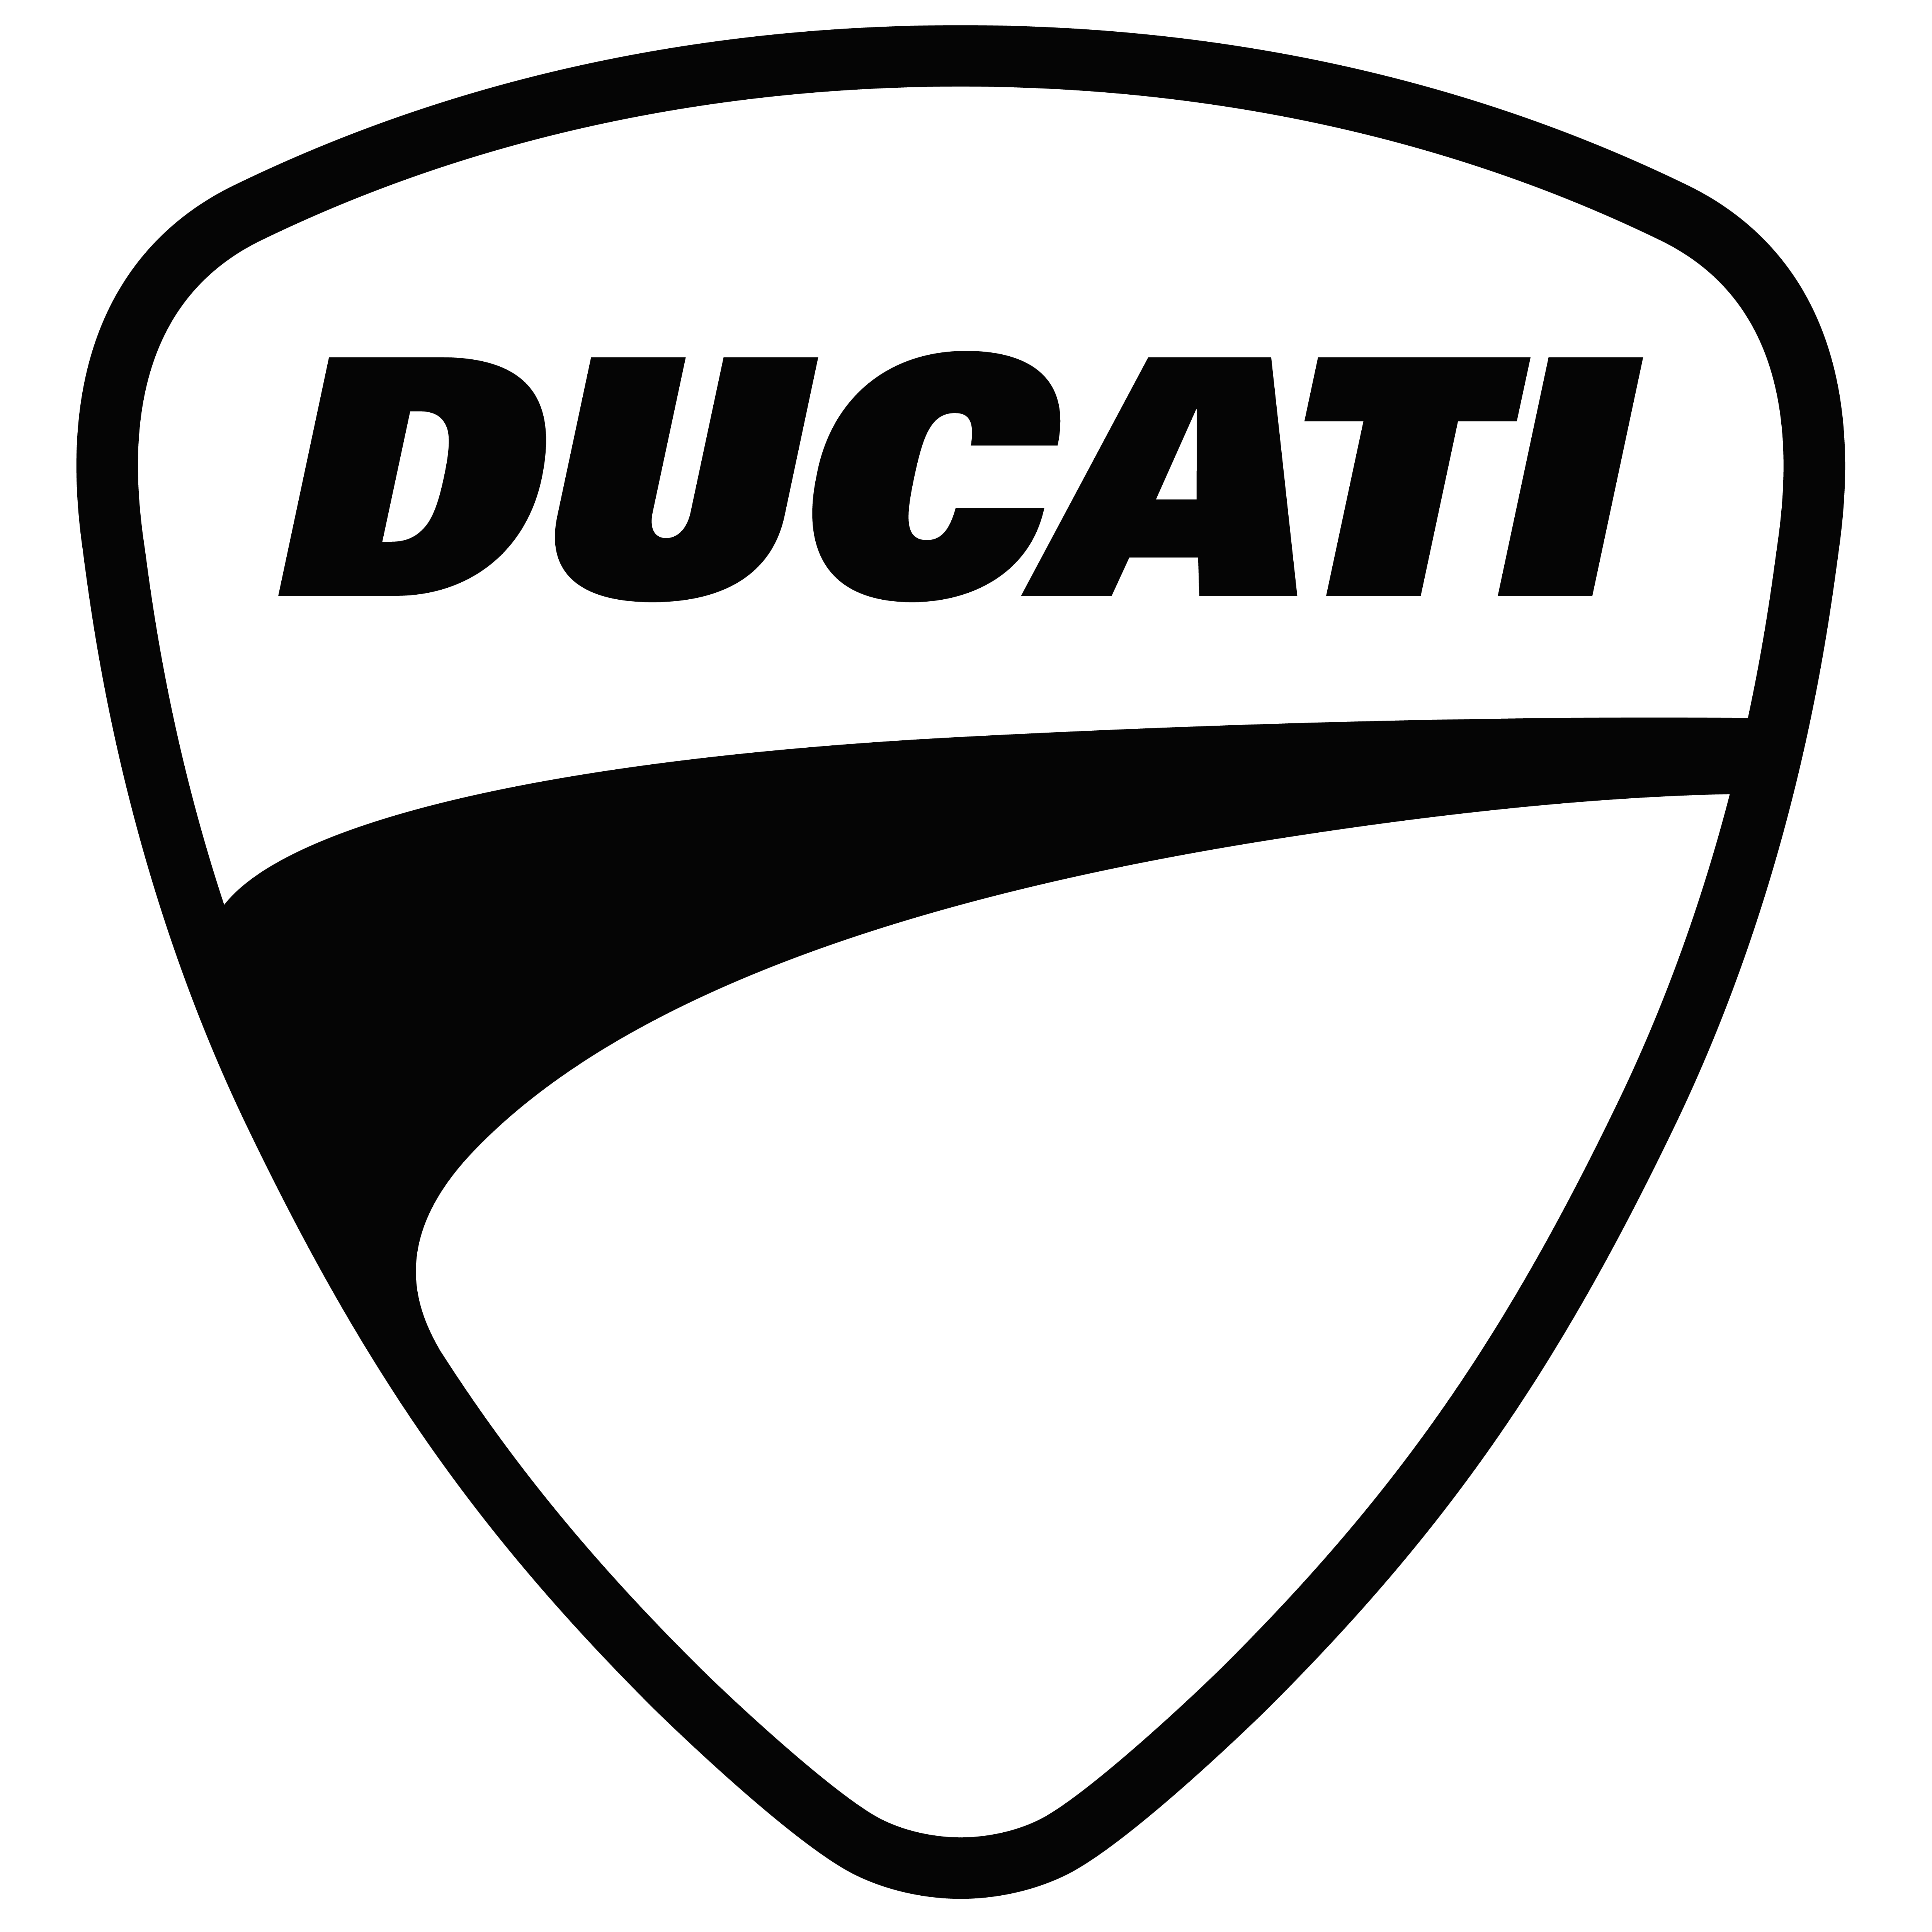 Motorcycle Black and White Brand Logo - Ducati logo | Motorcycle Brands